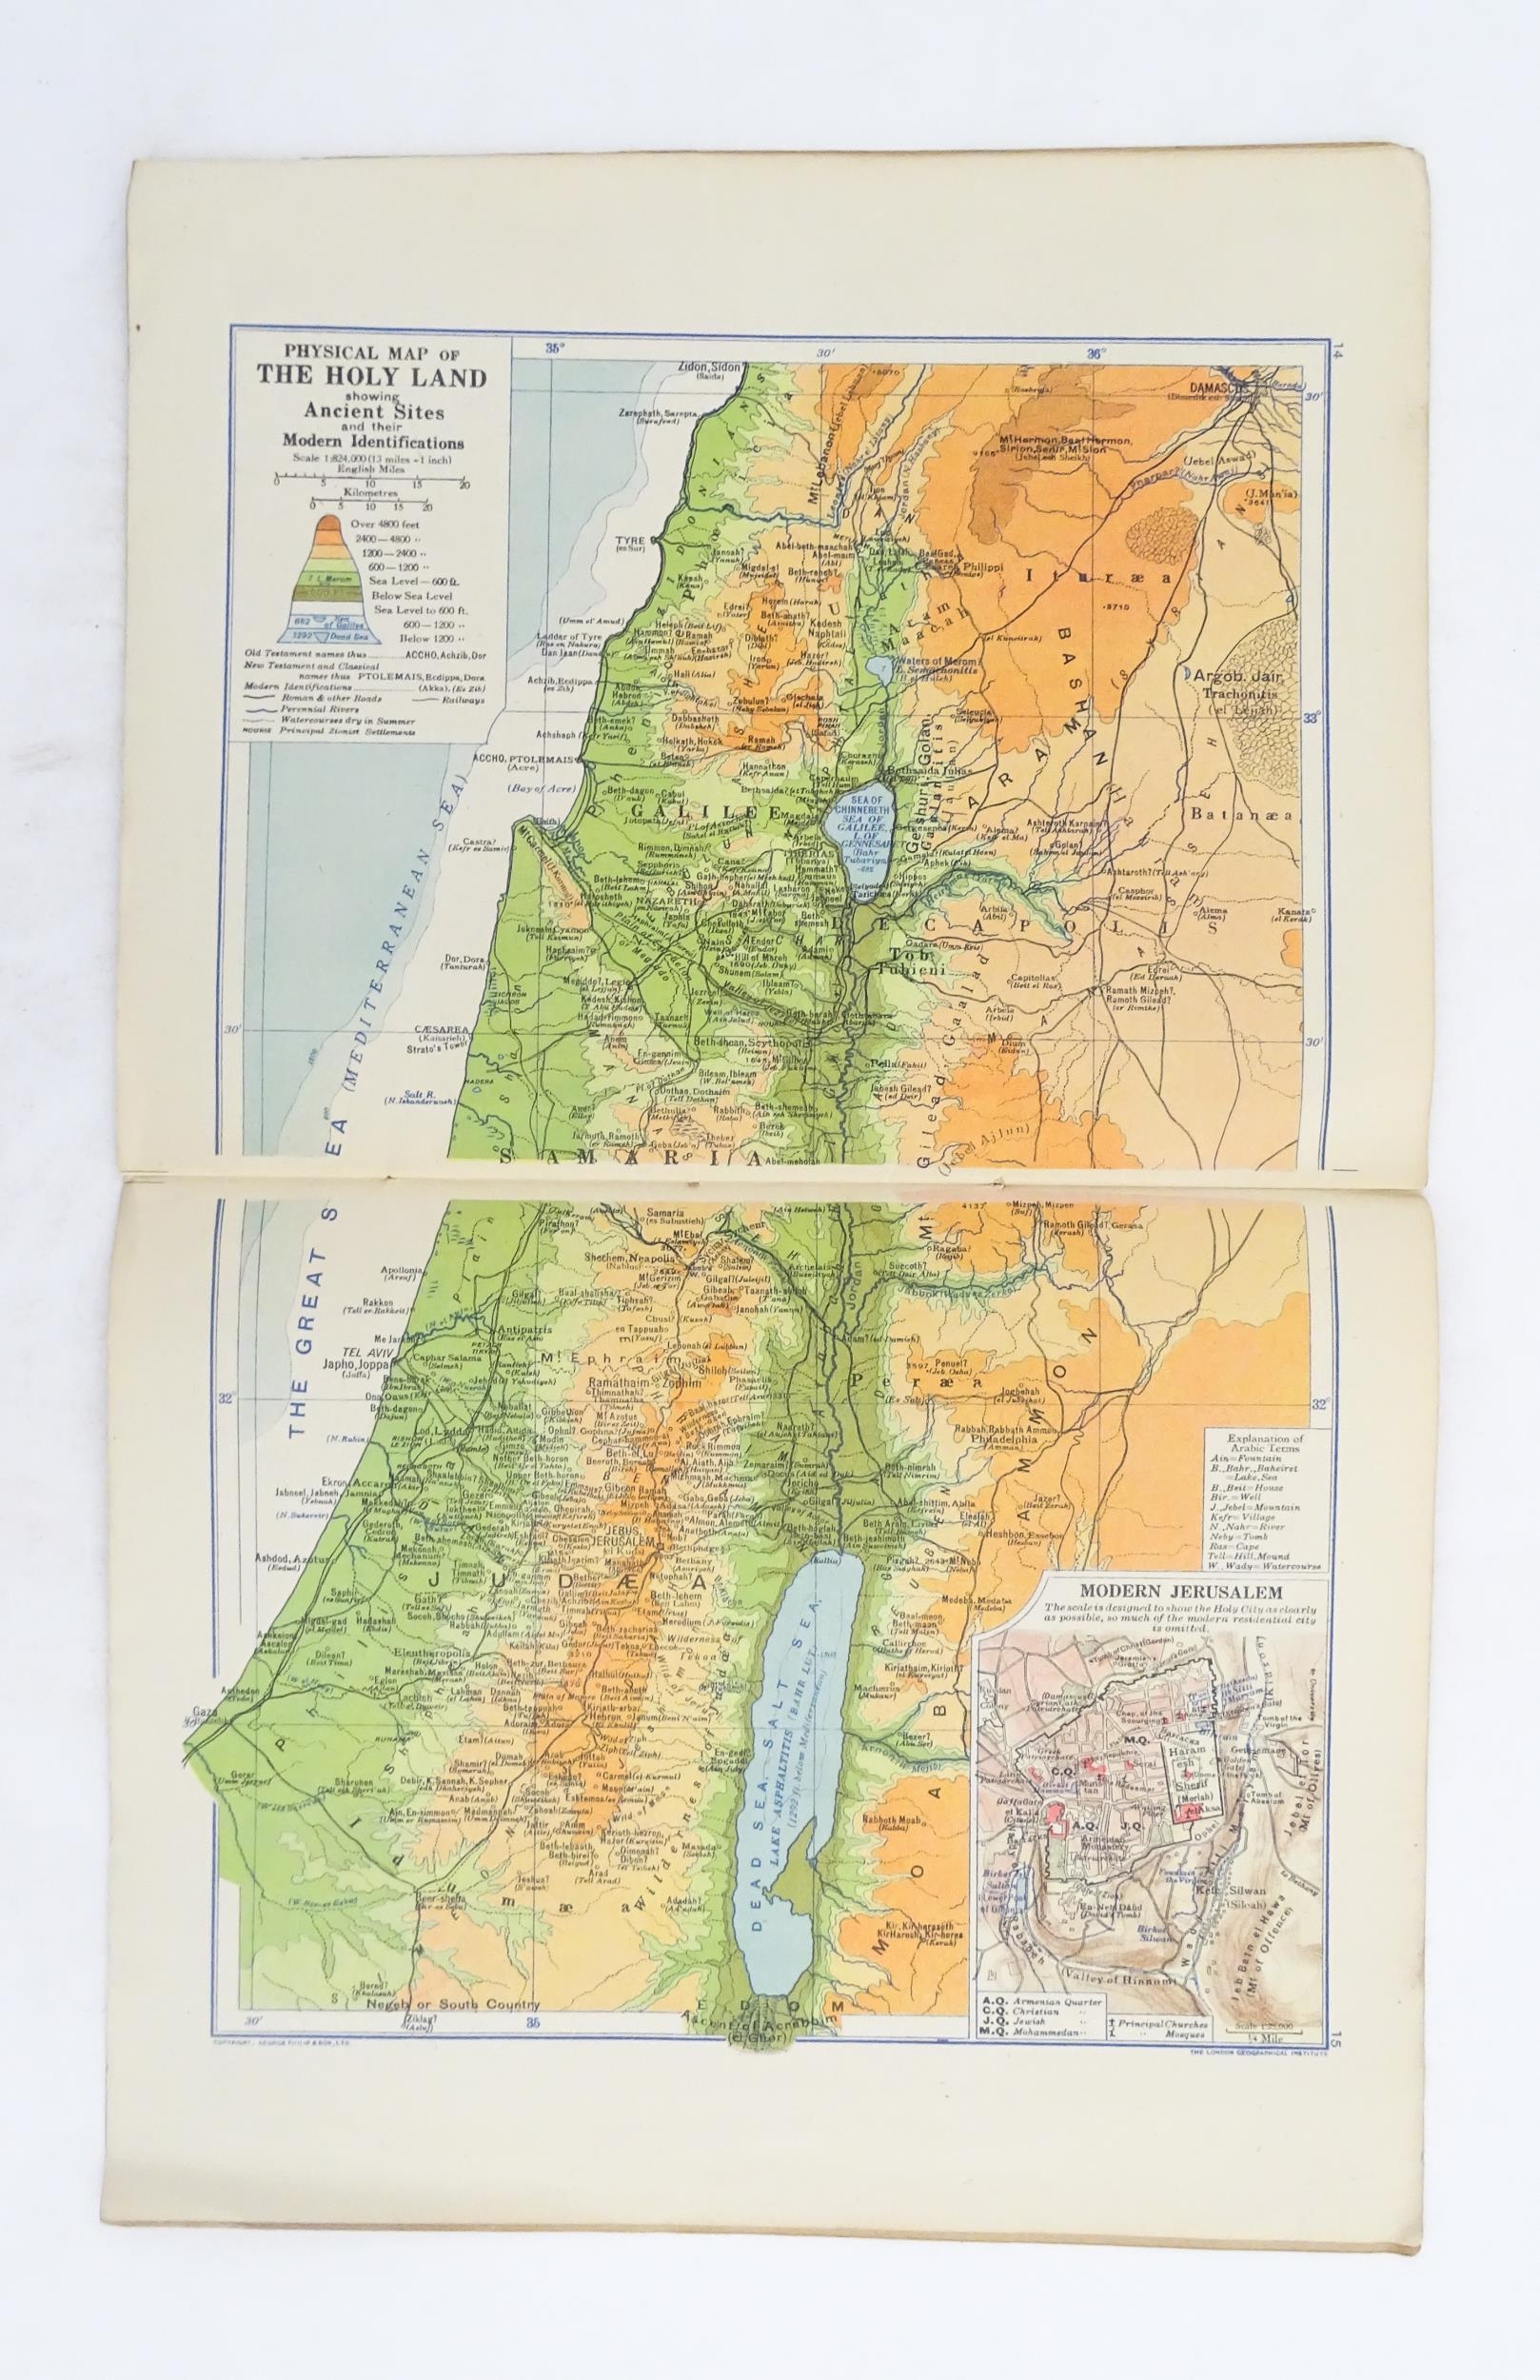 Maps: Philips' New Scripture Atlas, to include maps and plans illustrating the historical - Image 6 of 7